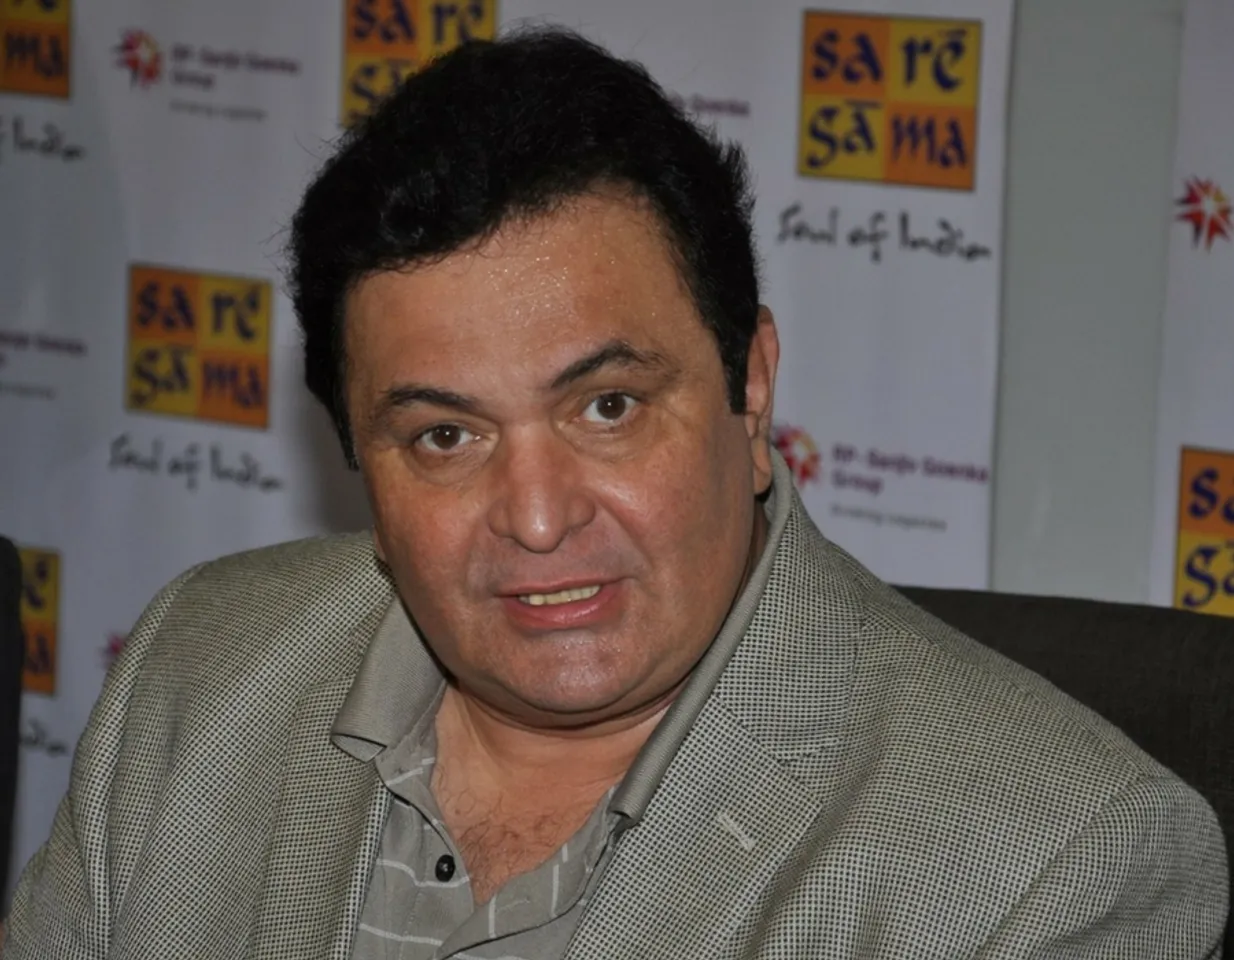 RISHI KAPOOR OPENS UP ON FIR CASE OVER AN INDECENT CHILD'S PHOTO